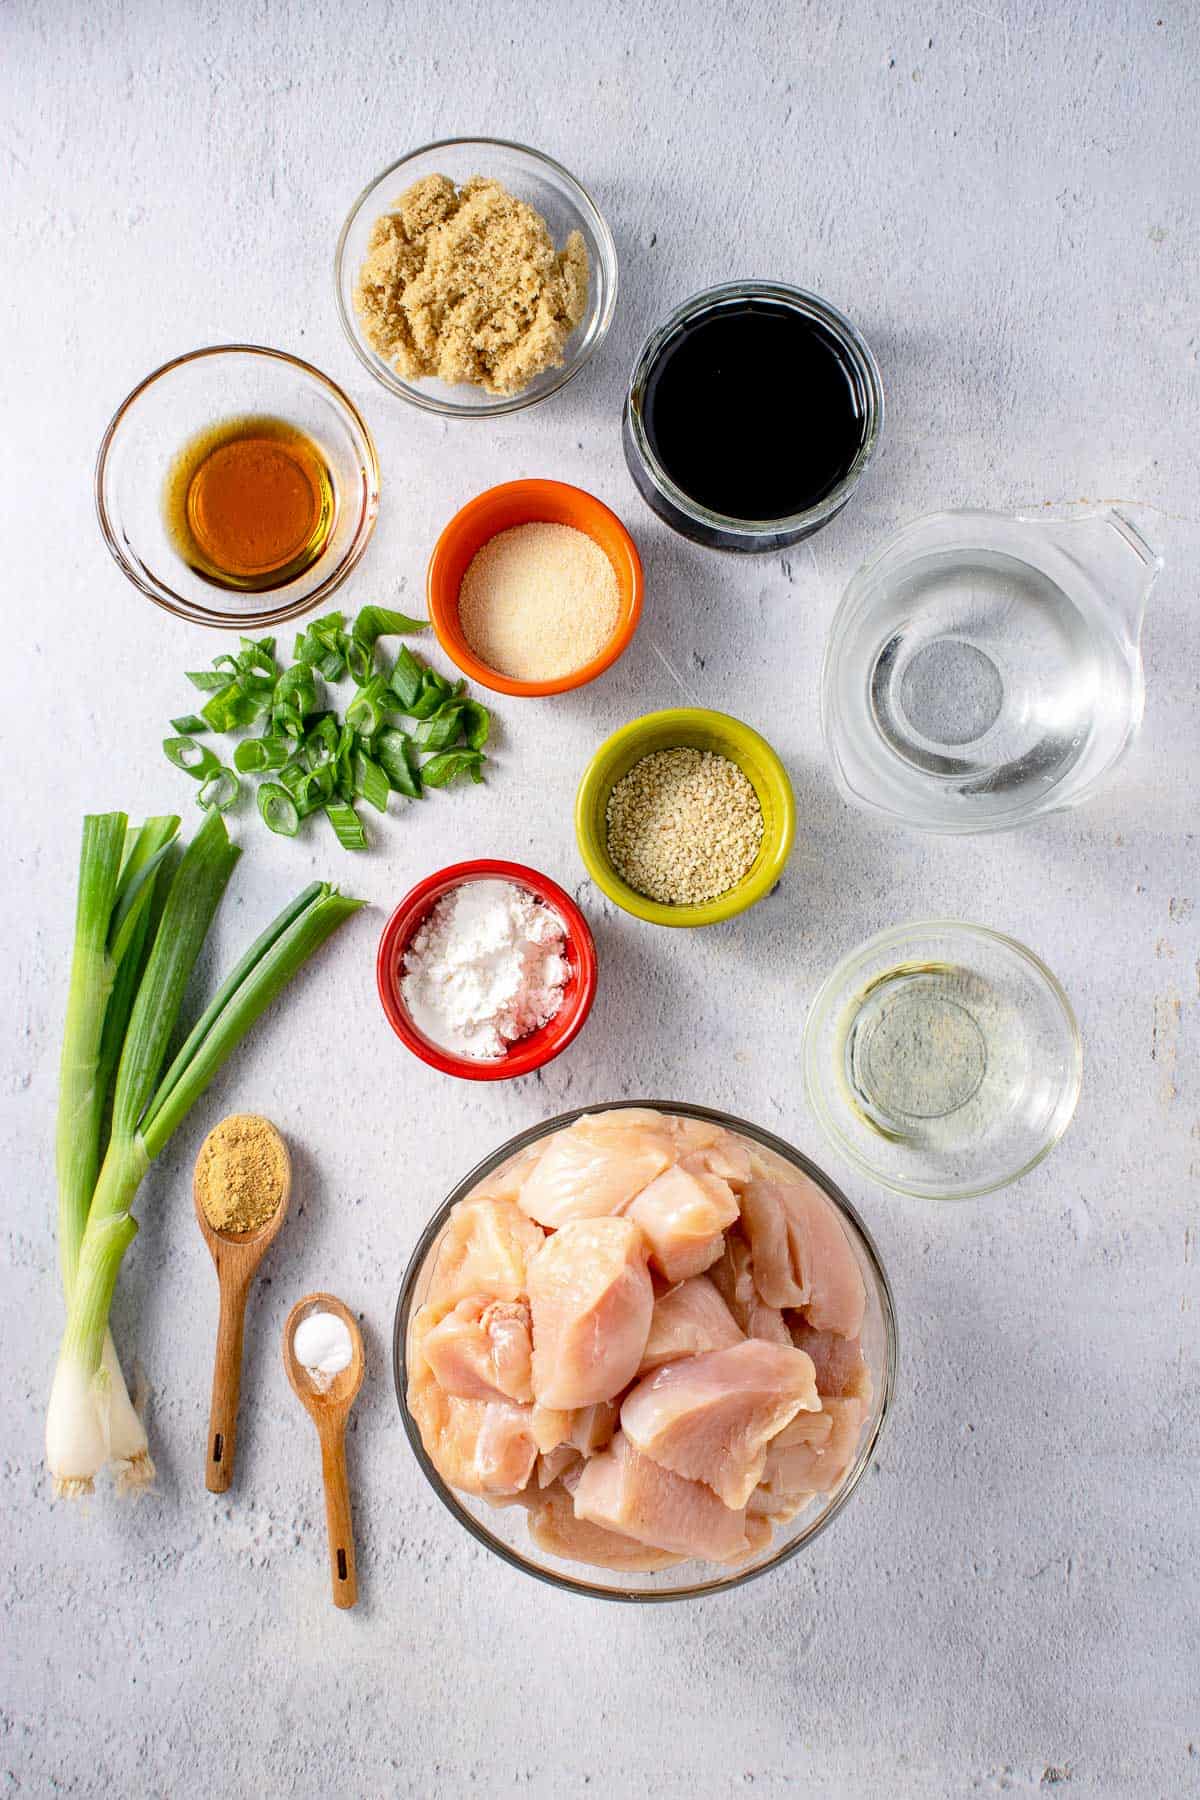 Ingredients for chicken recipe on table